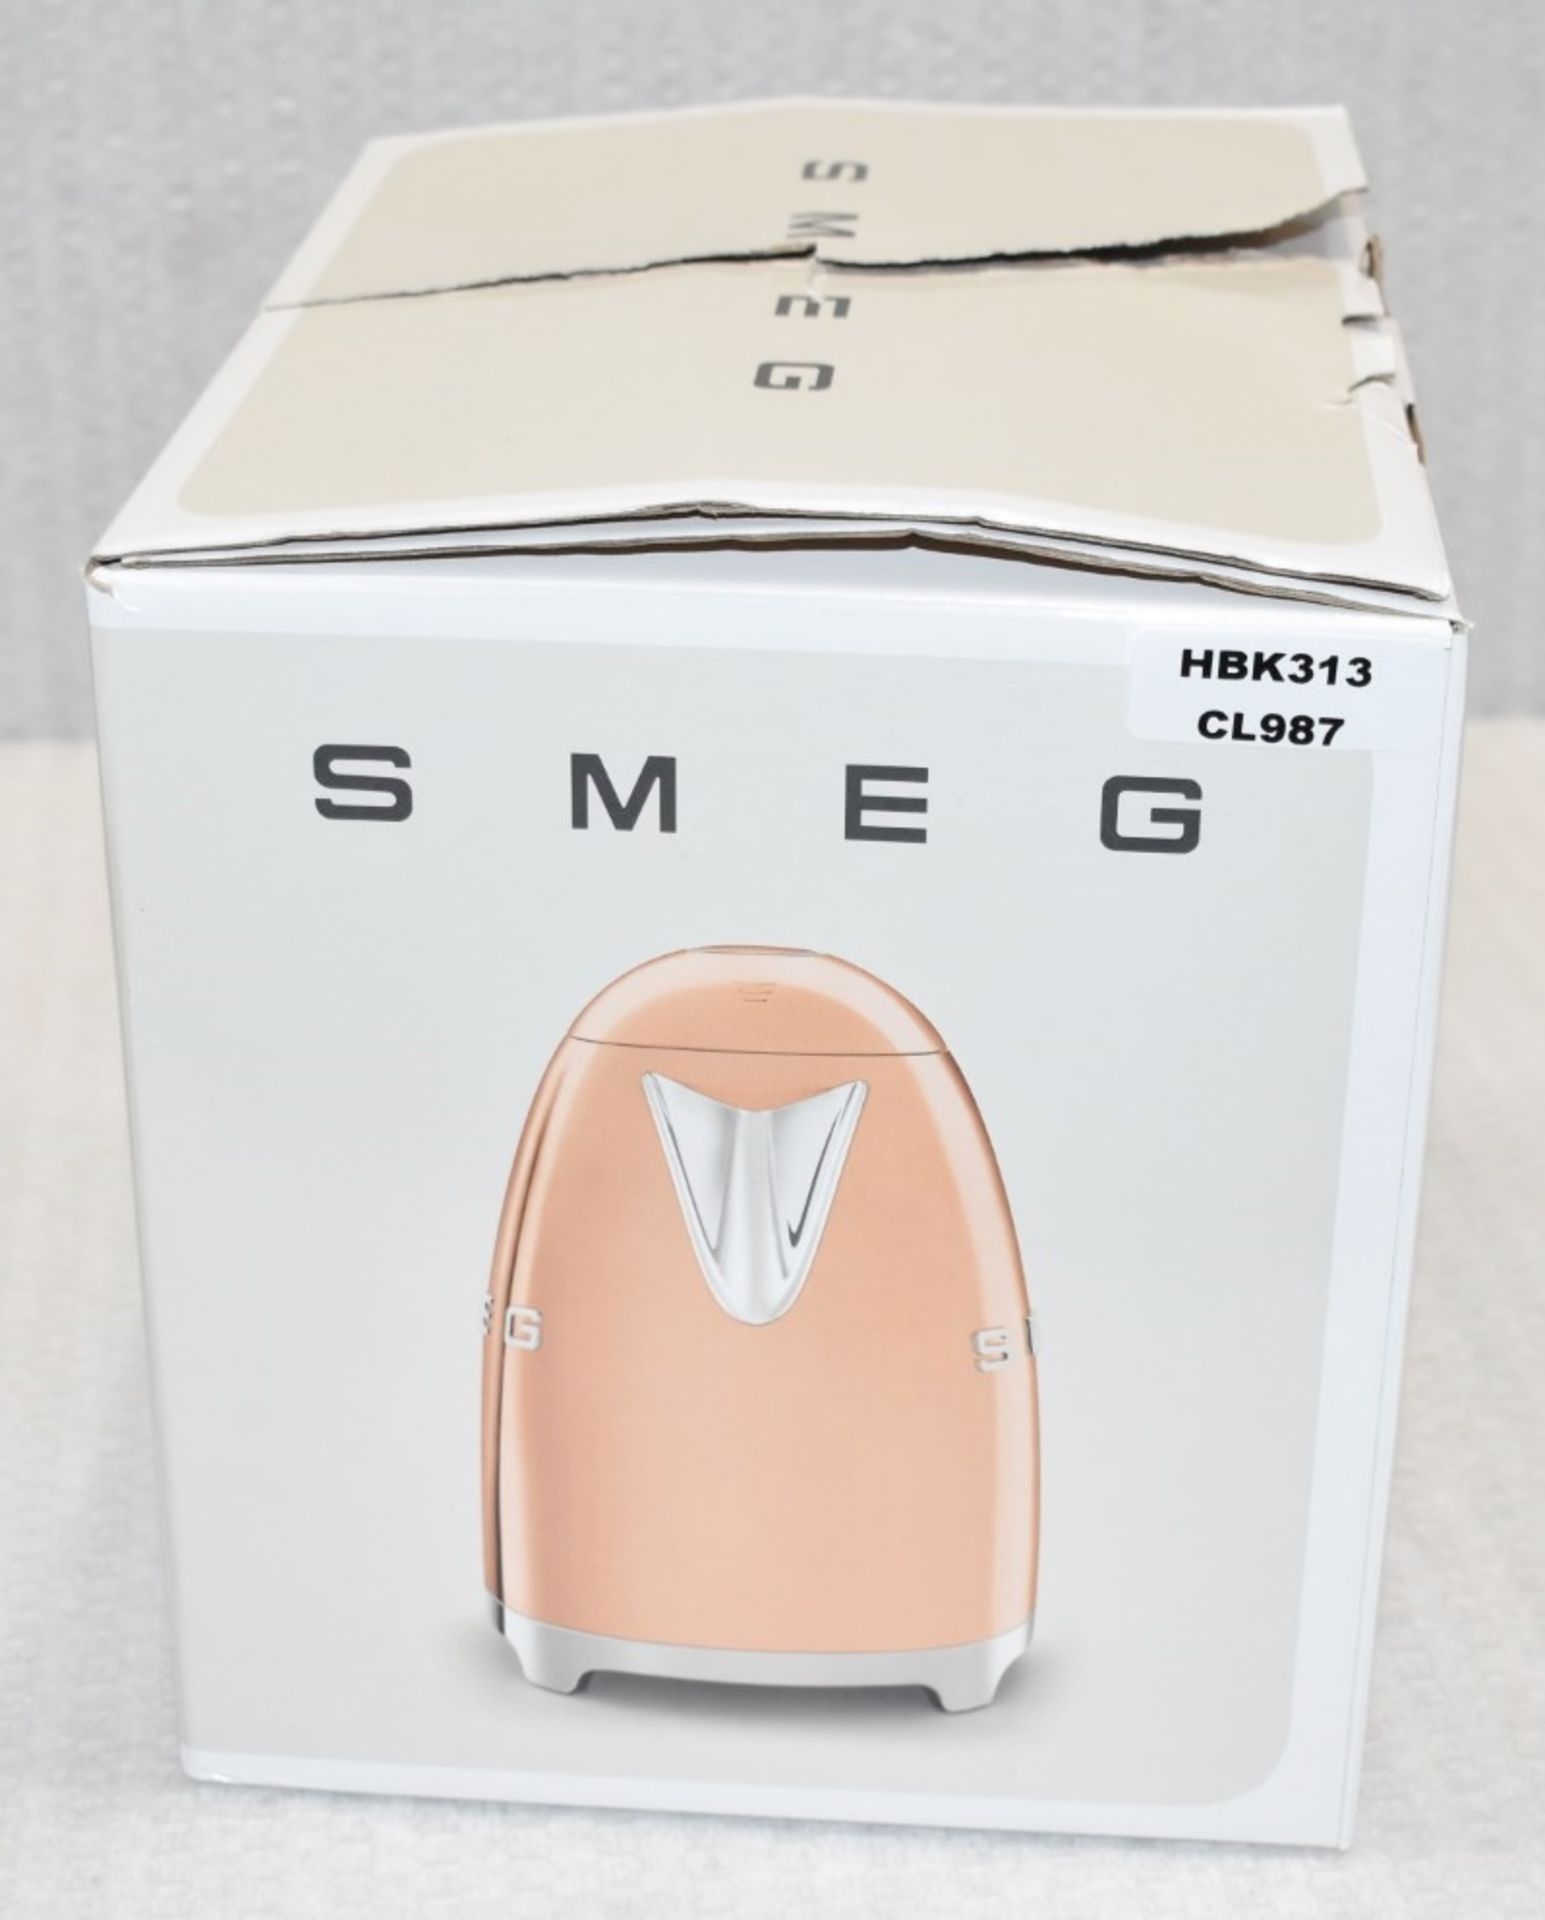 1 x SMEG 50’s Retro Style 1.7L Kettle with a Rose Gold Finish - Original Price £189.00 - Image 9 of 11